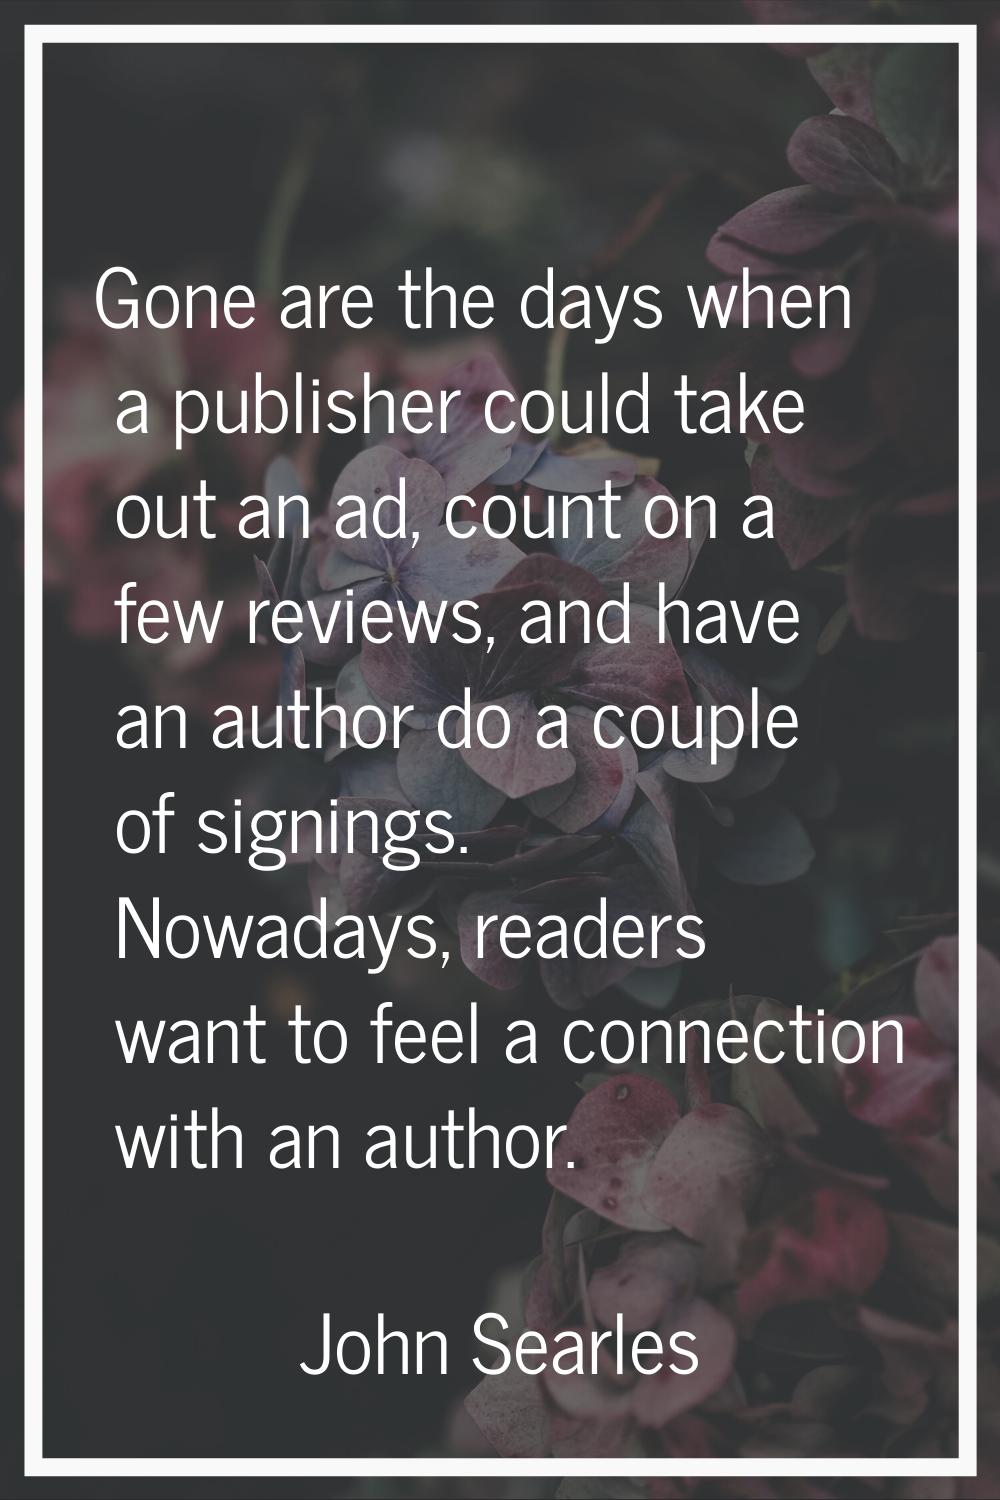 Gone are the days when a publisher could take out an ad, count on a few reviews, and have an author